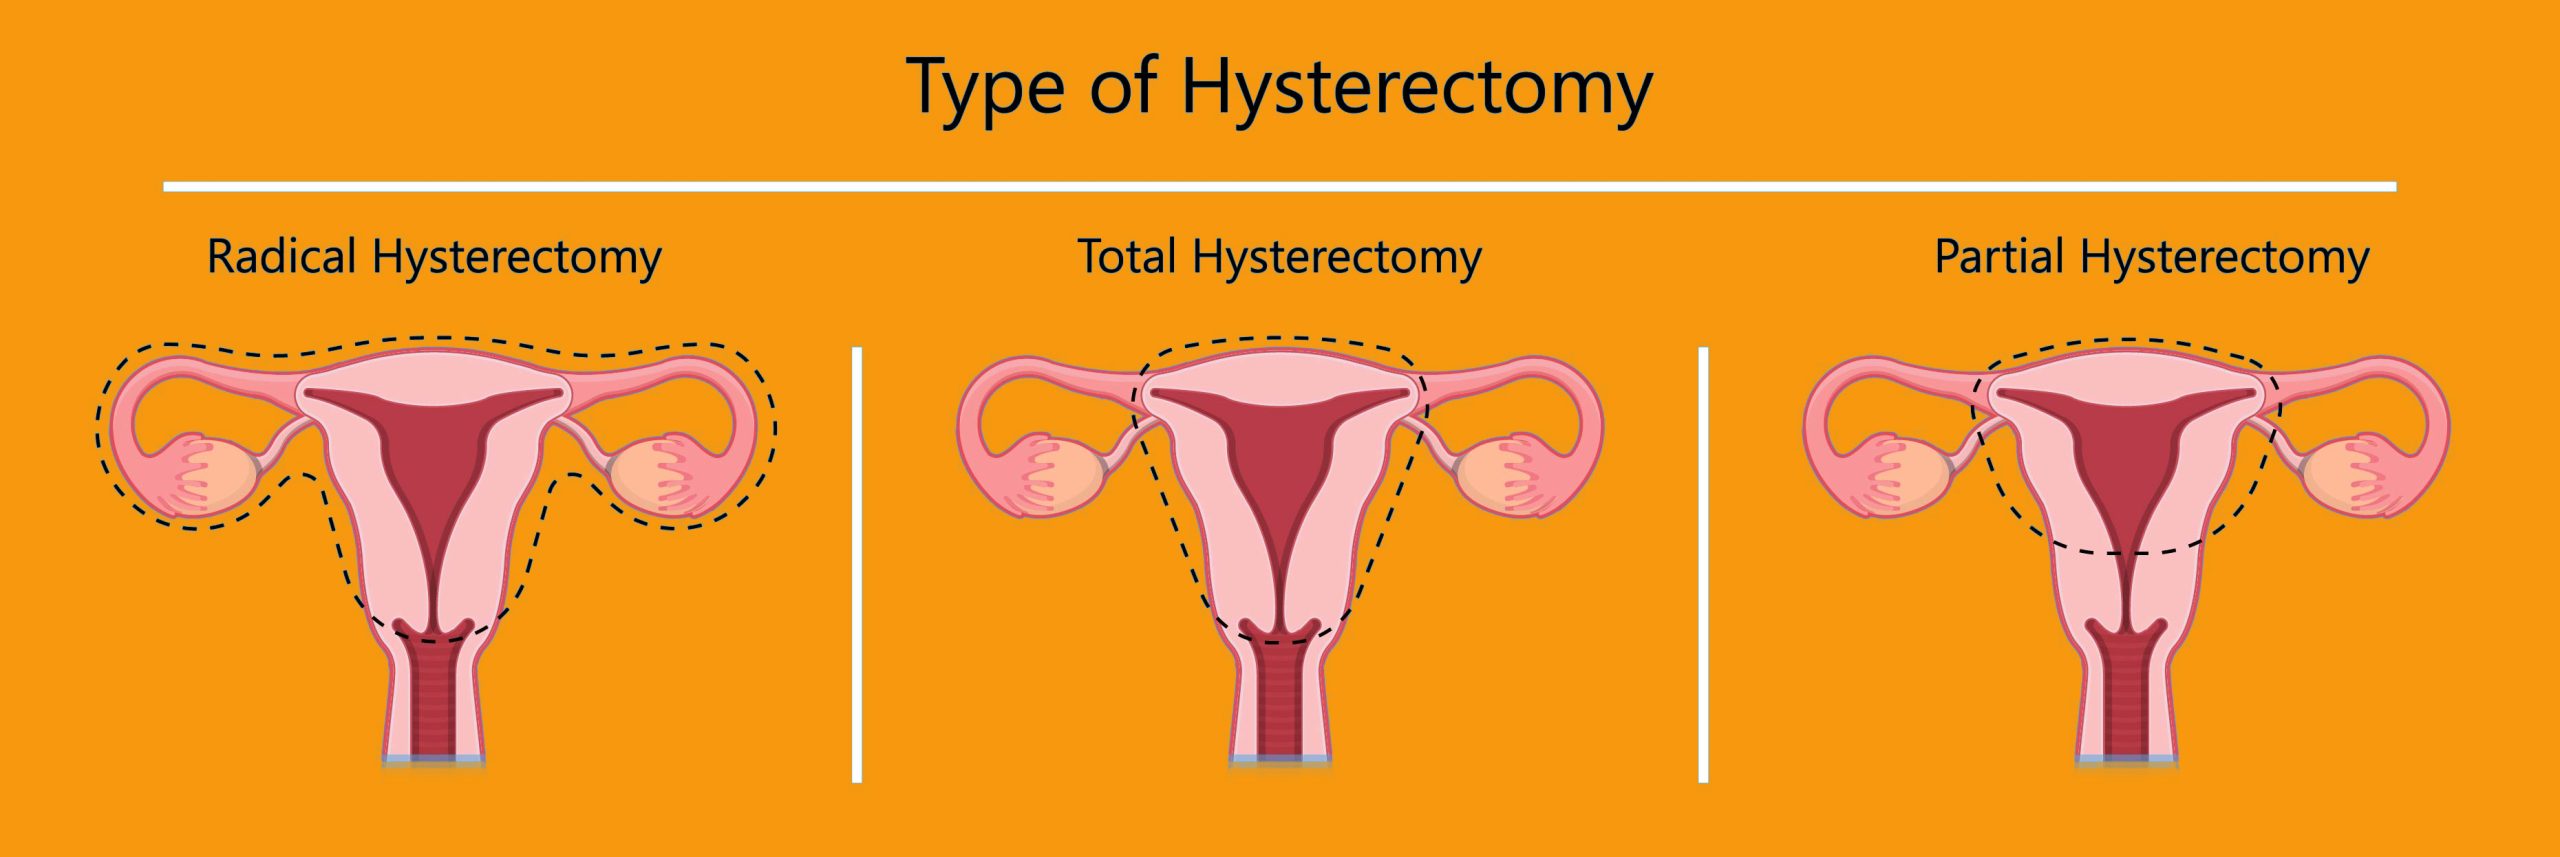 hysterectomy cost in dubai, Types of Hysterectomy - Dr Pranjali Singh